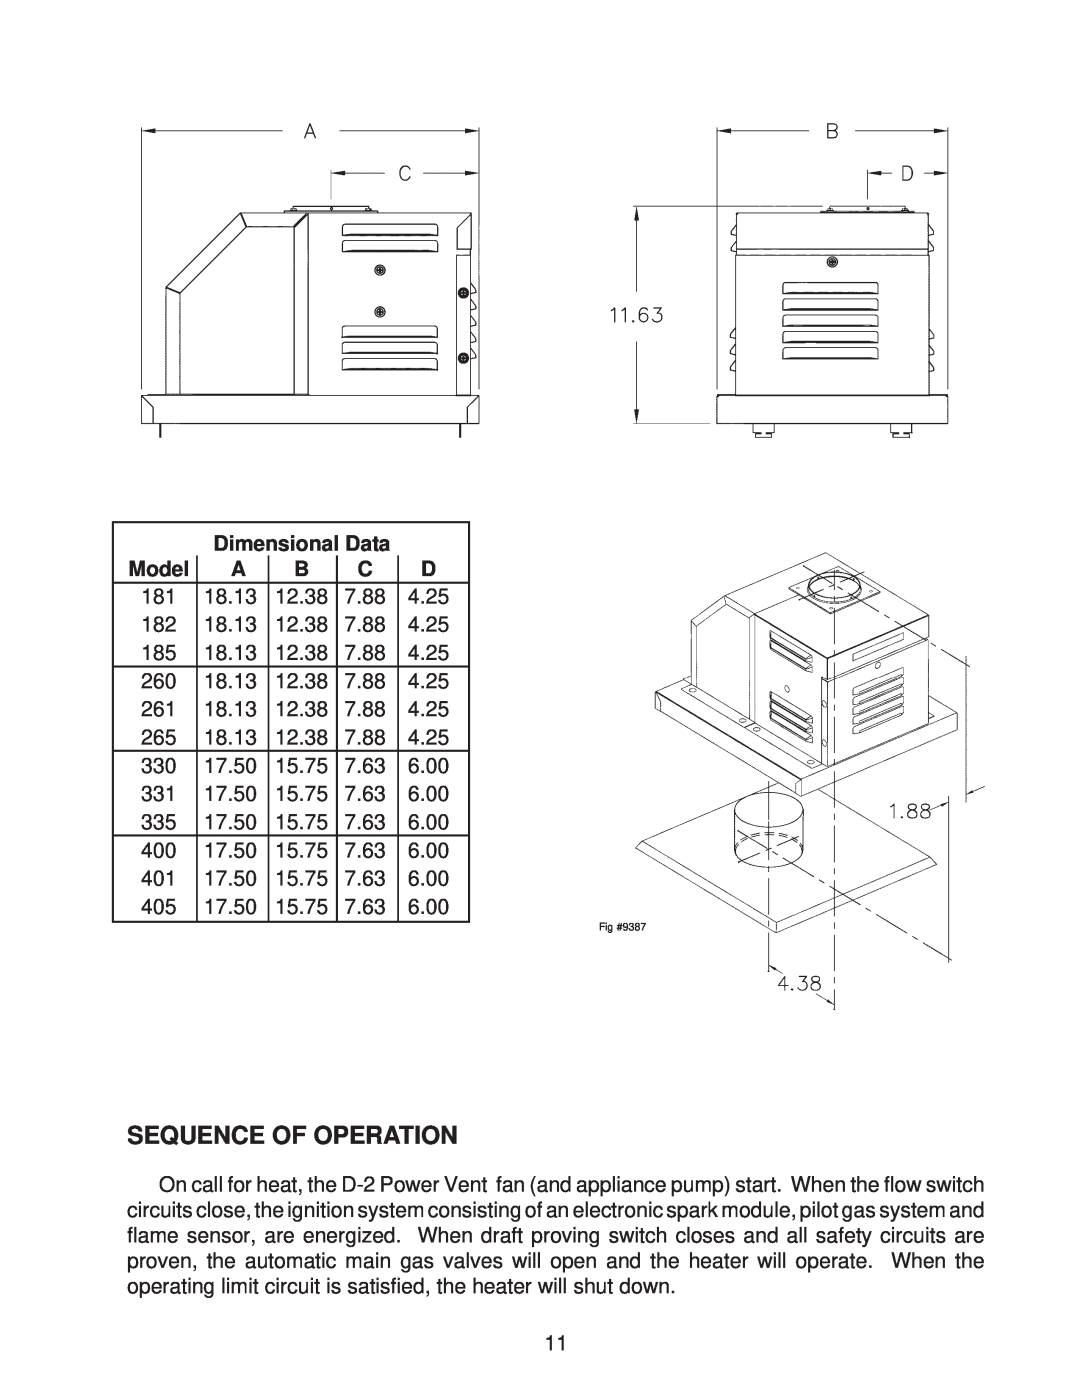 Raypak 265, 185, 335, 405 installation instructions Sequence Of Operation, Dimensional Data, Model 